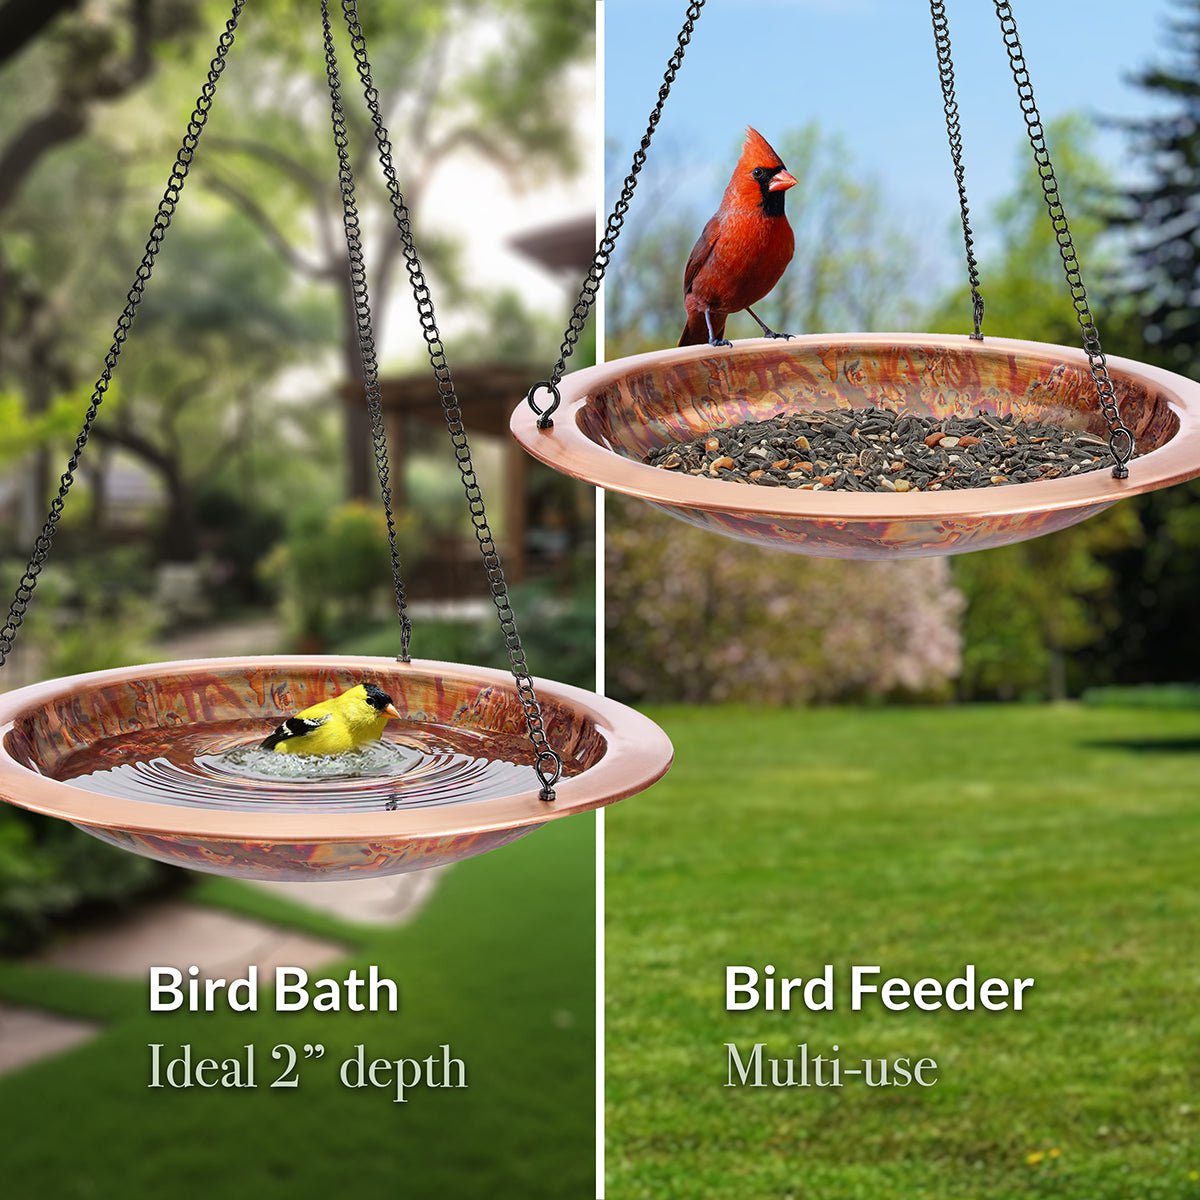 13.5" Hanging Fired Copper Bird Bath - Good Directions